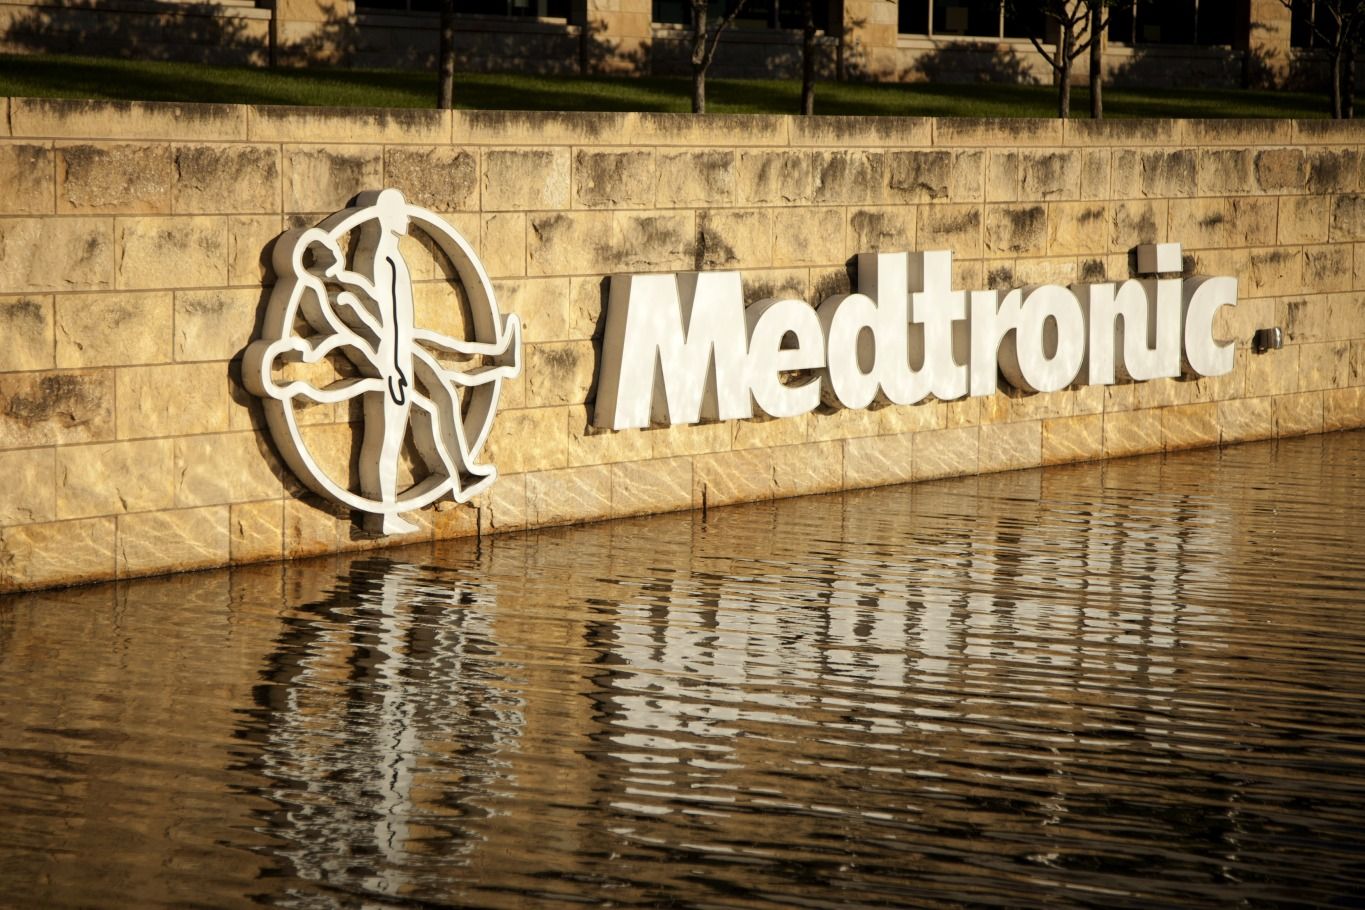 The US headquarters for Medtronic, one of the world's largest medical device companies, is located in Minnesota.